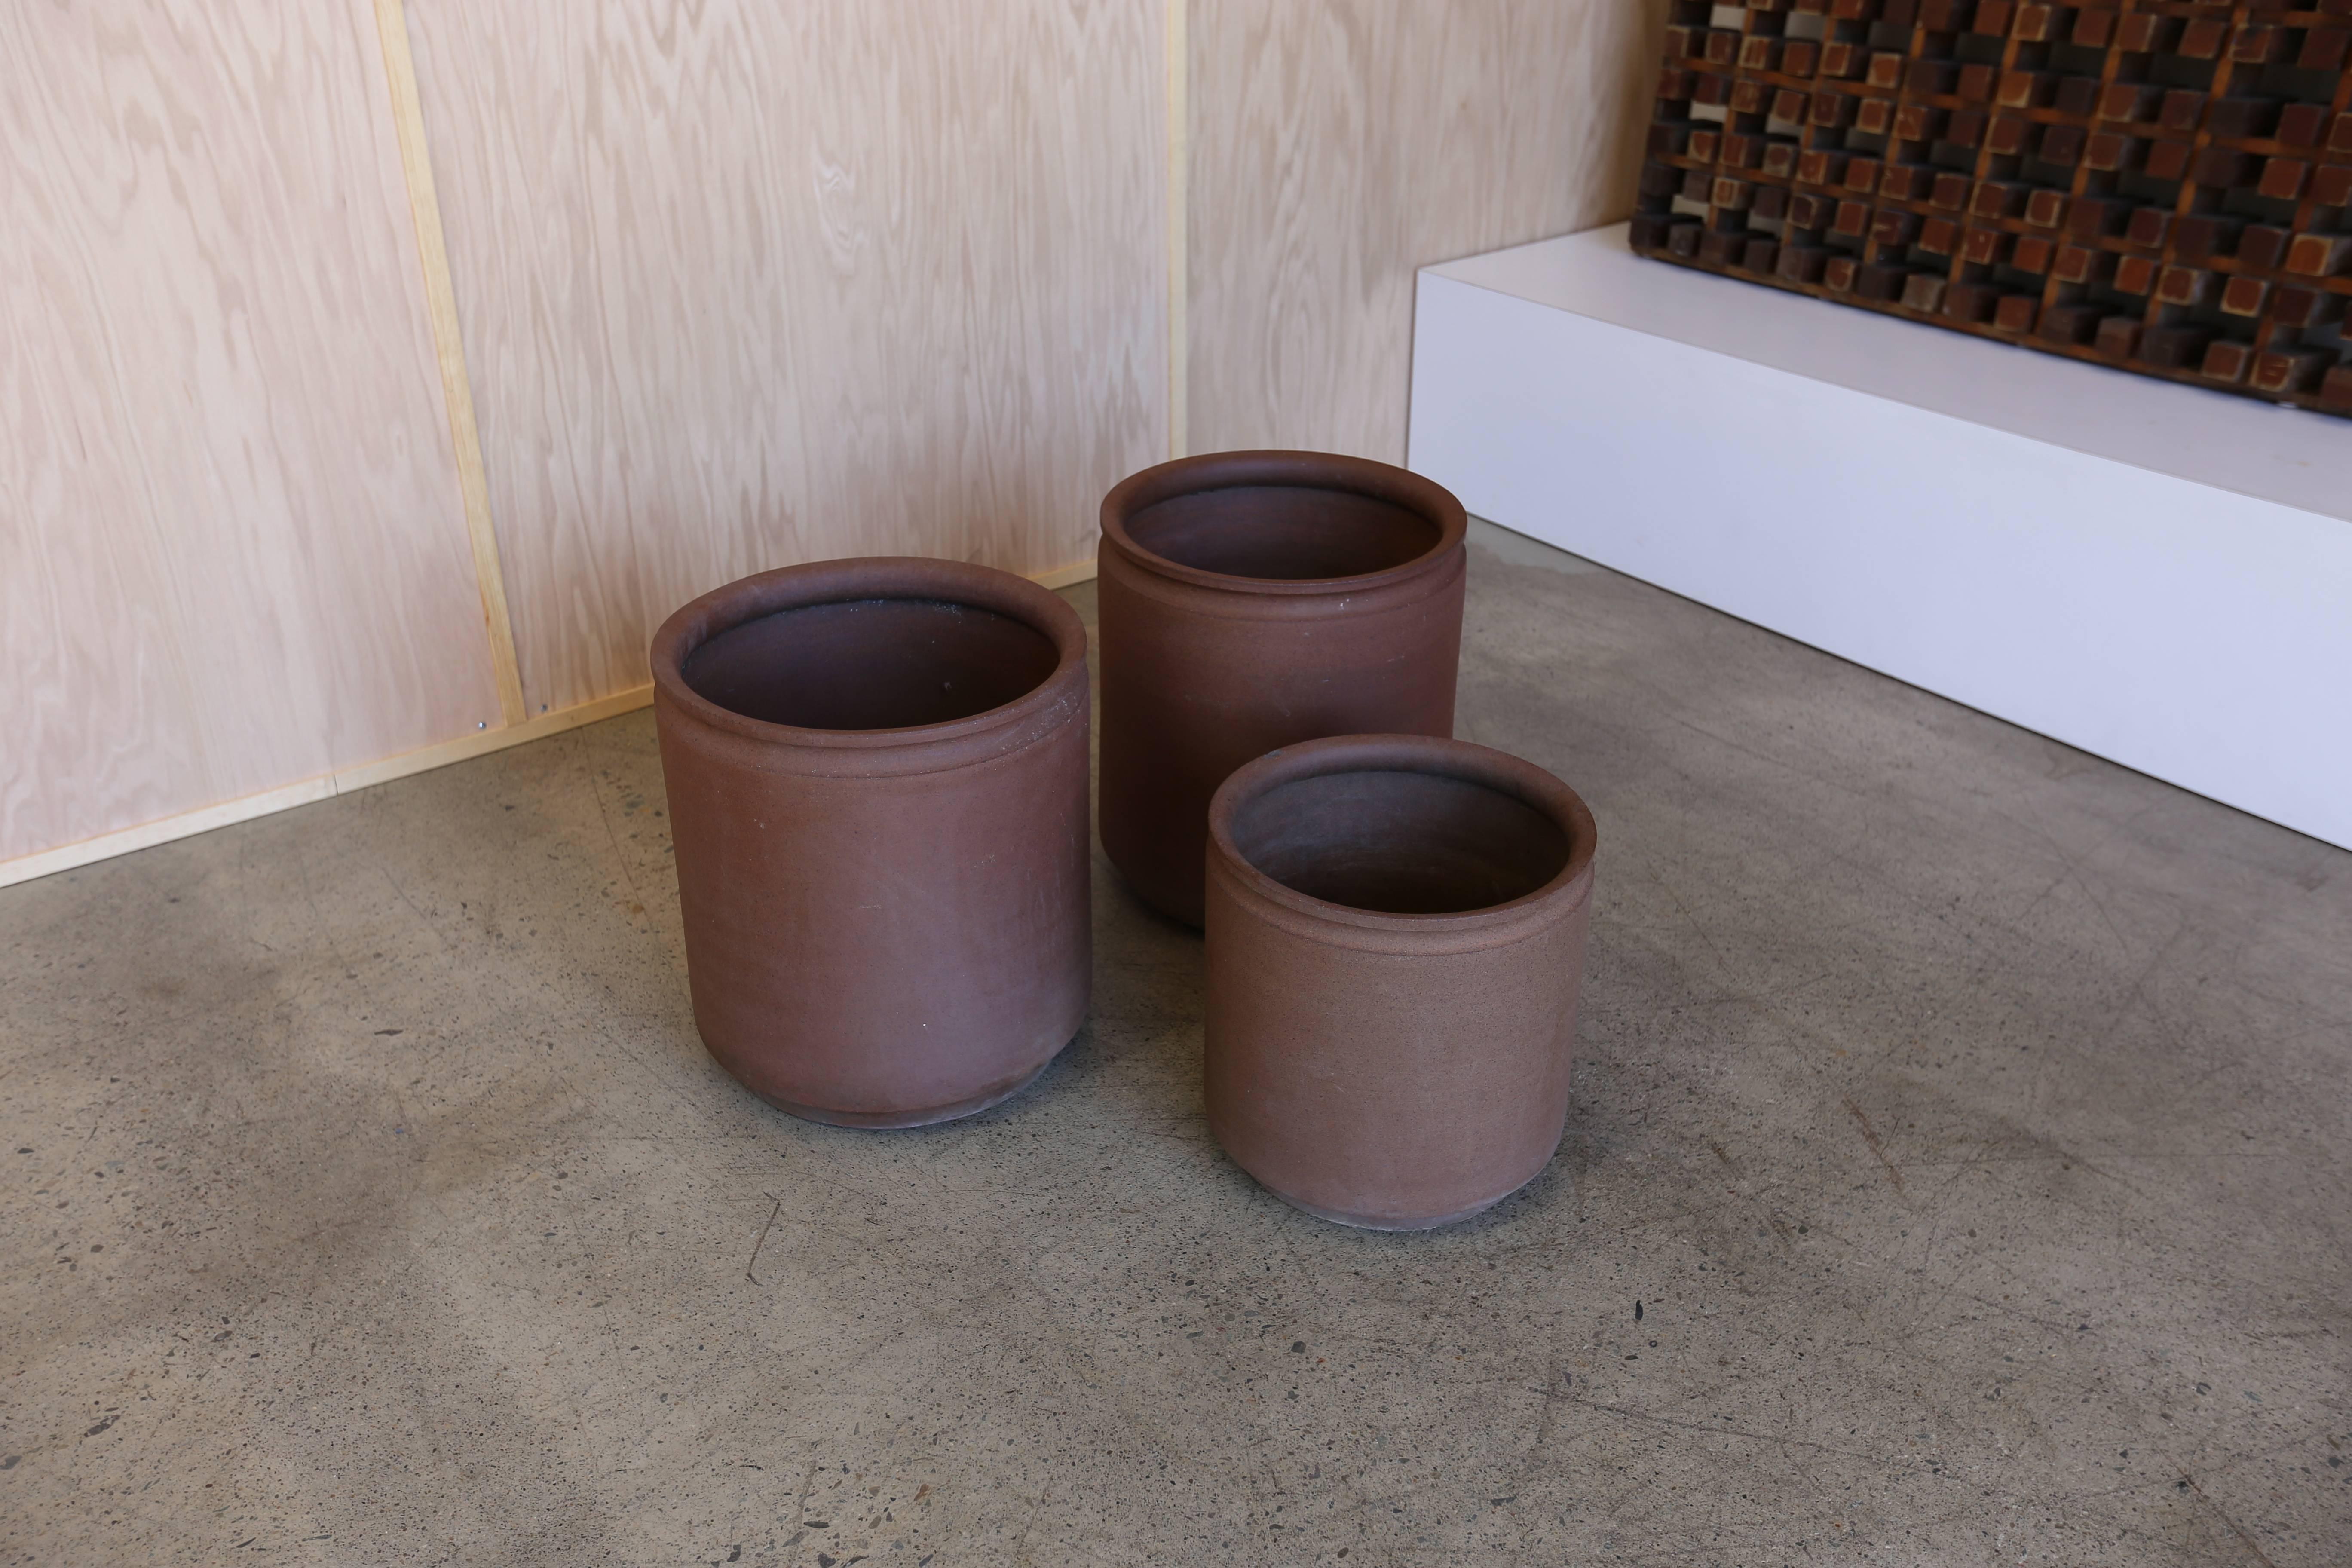 20th Century Group of Three Ceramic Planters by David Cressey and Robert Maxwell